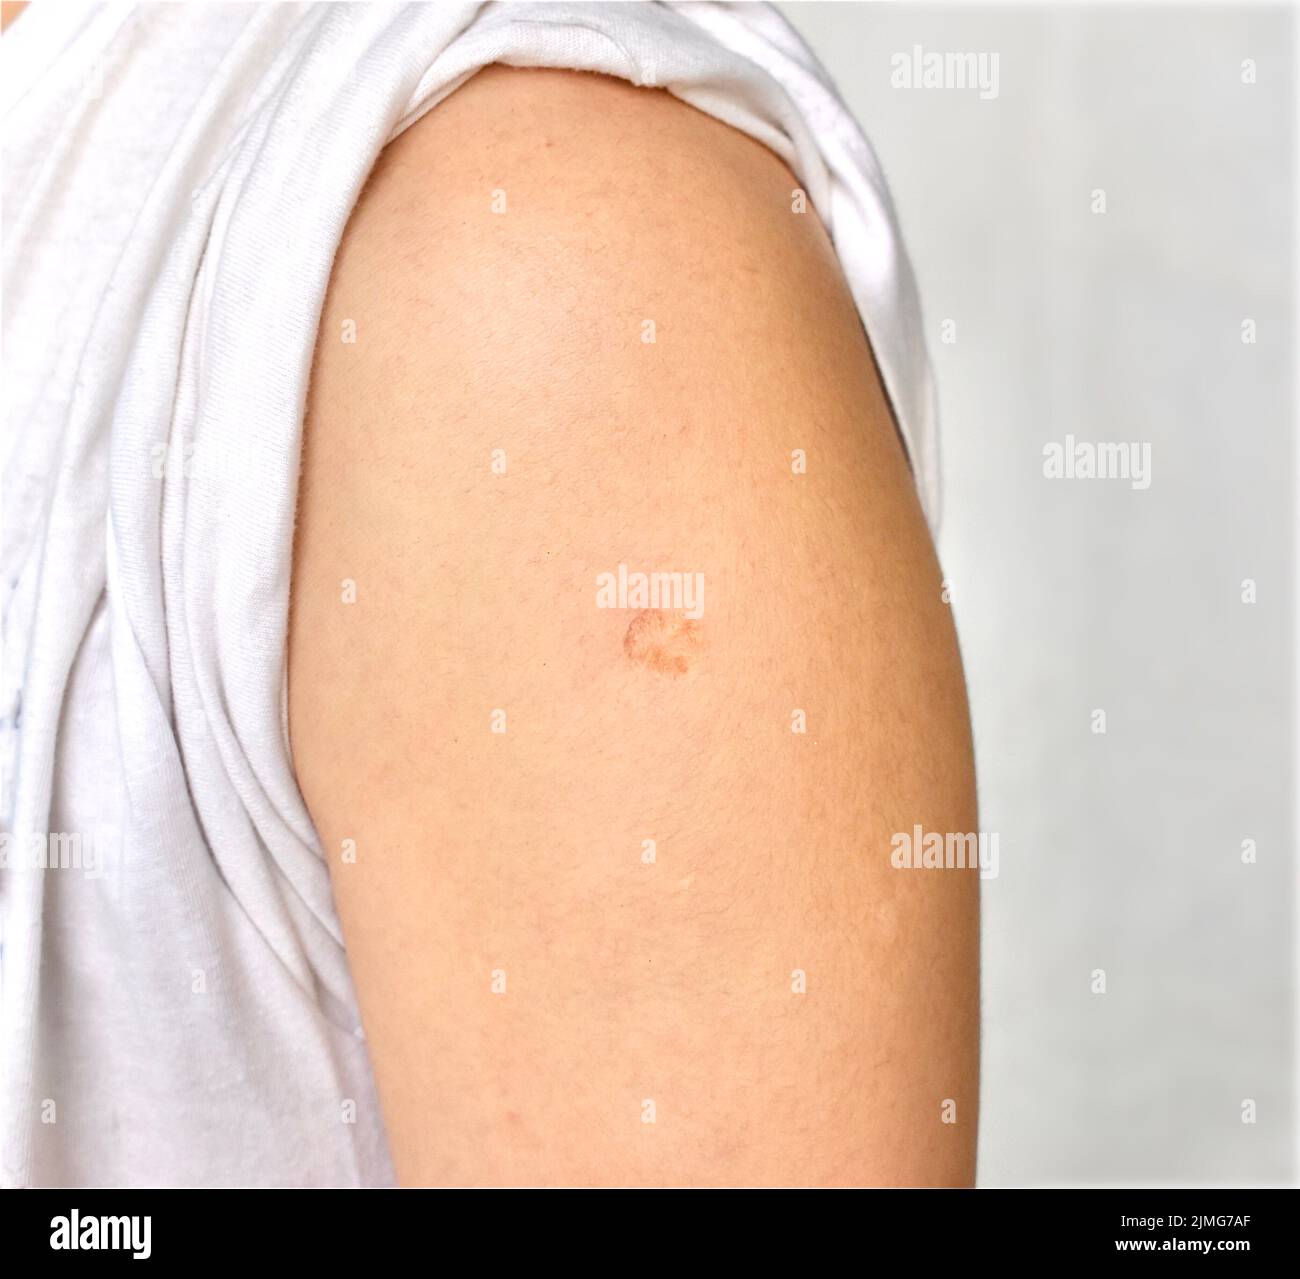 BCG or TB vaccine scar mark at the arm of Southeast Asian man. Stock Photo